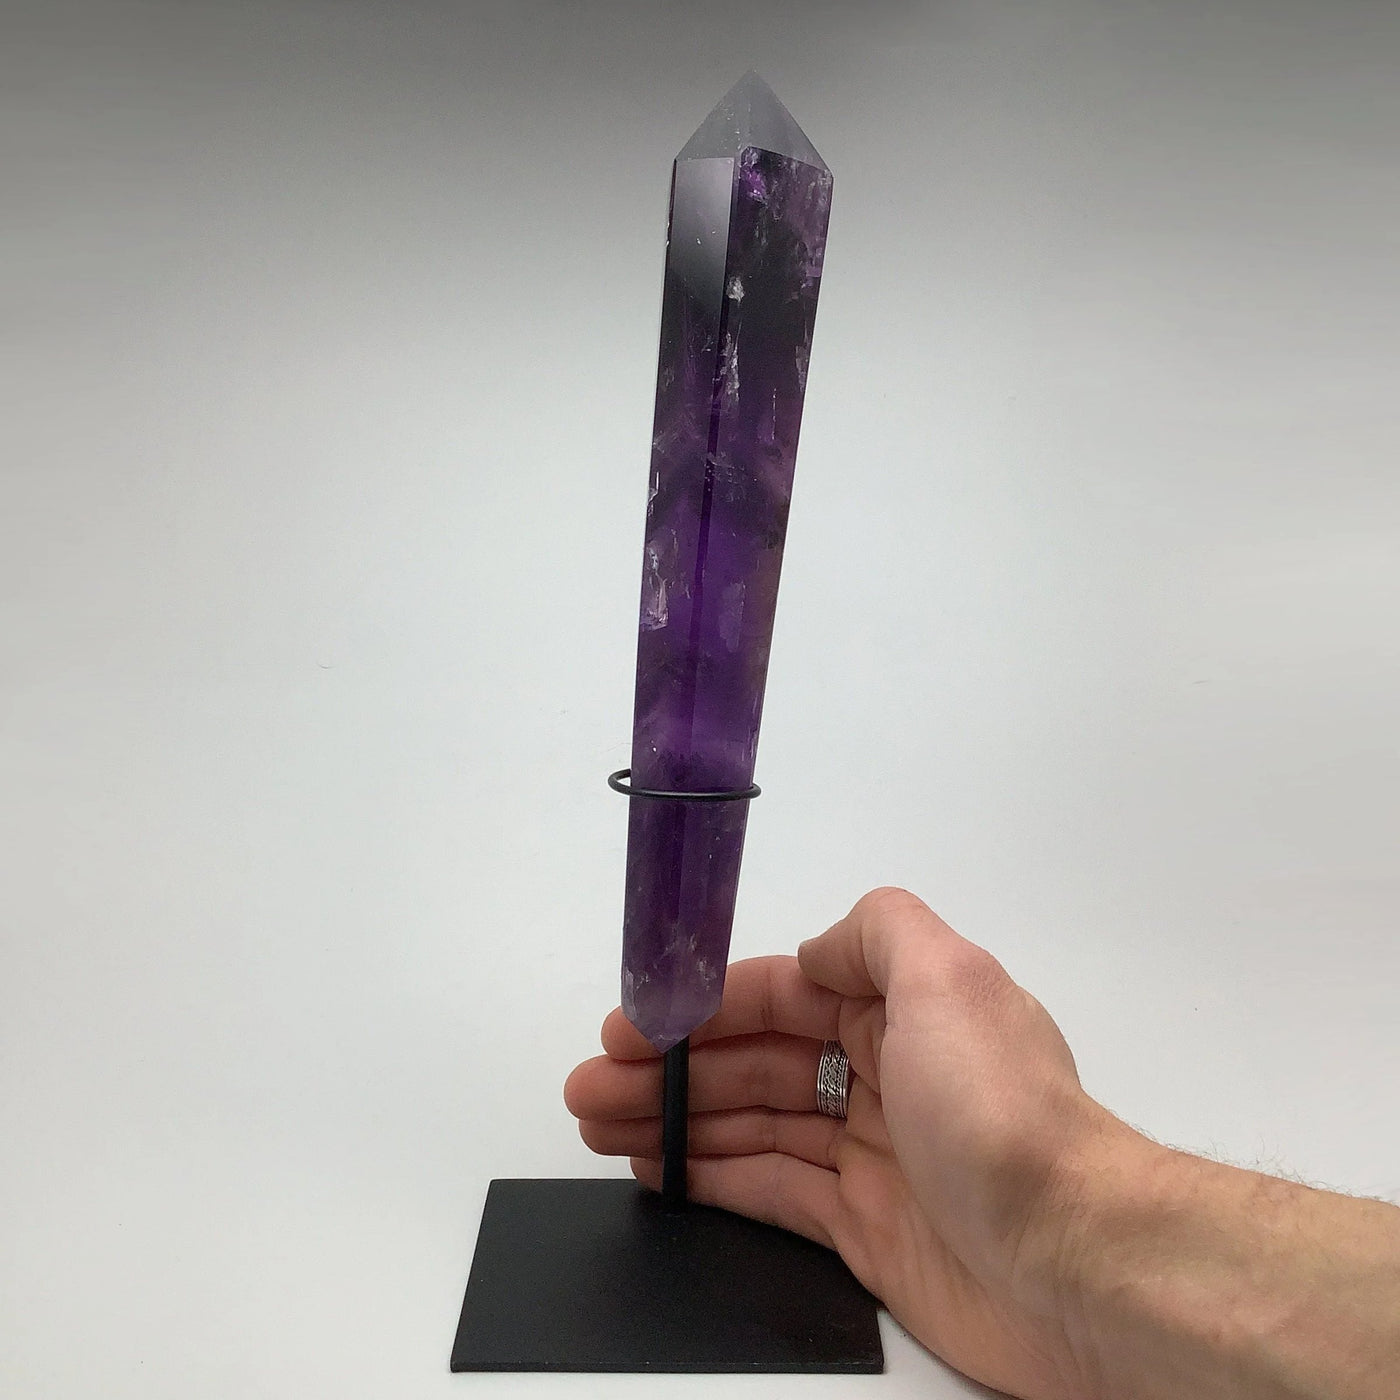 Double Terminated Amethyst Point on Stand